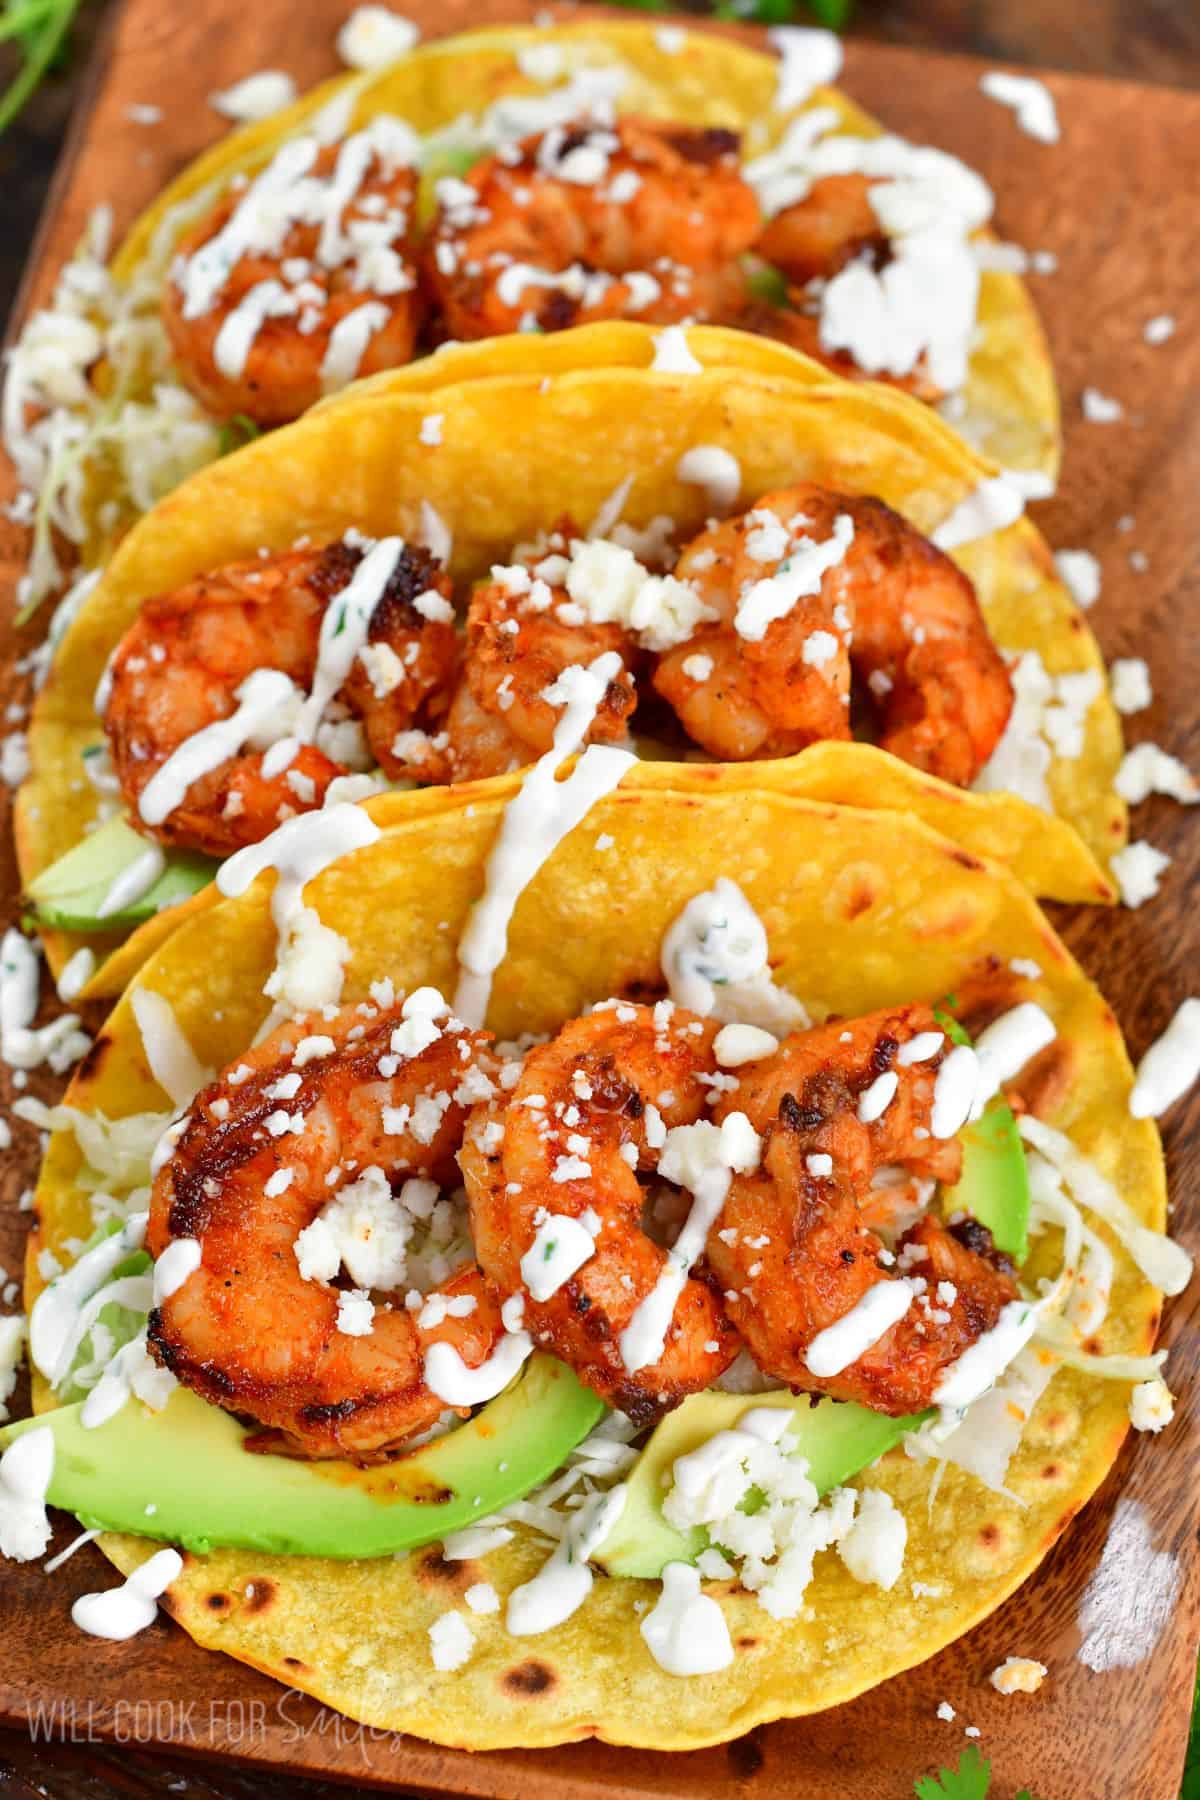 Three shrimp tacos on a wood plate with creme, avocado, an dcheese.